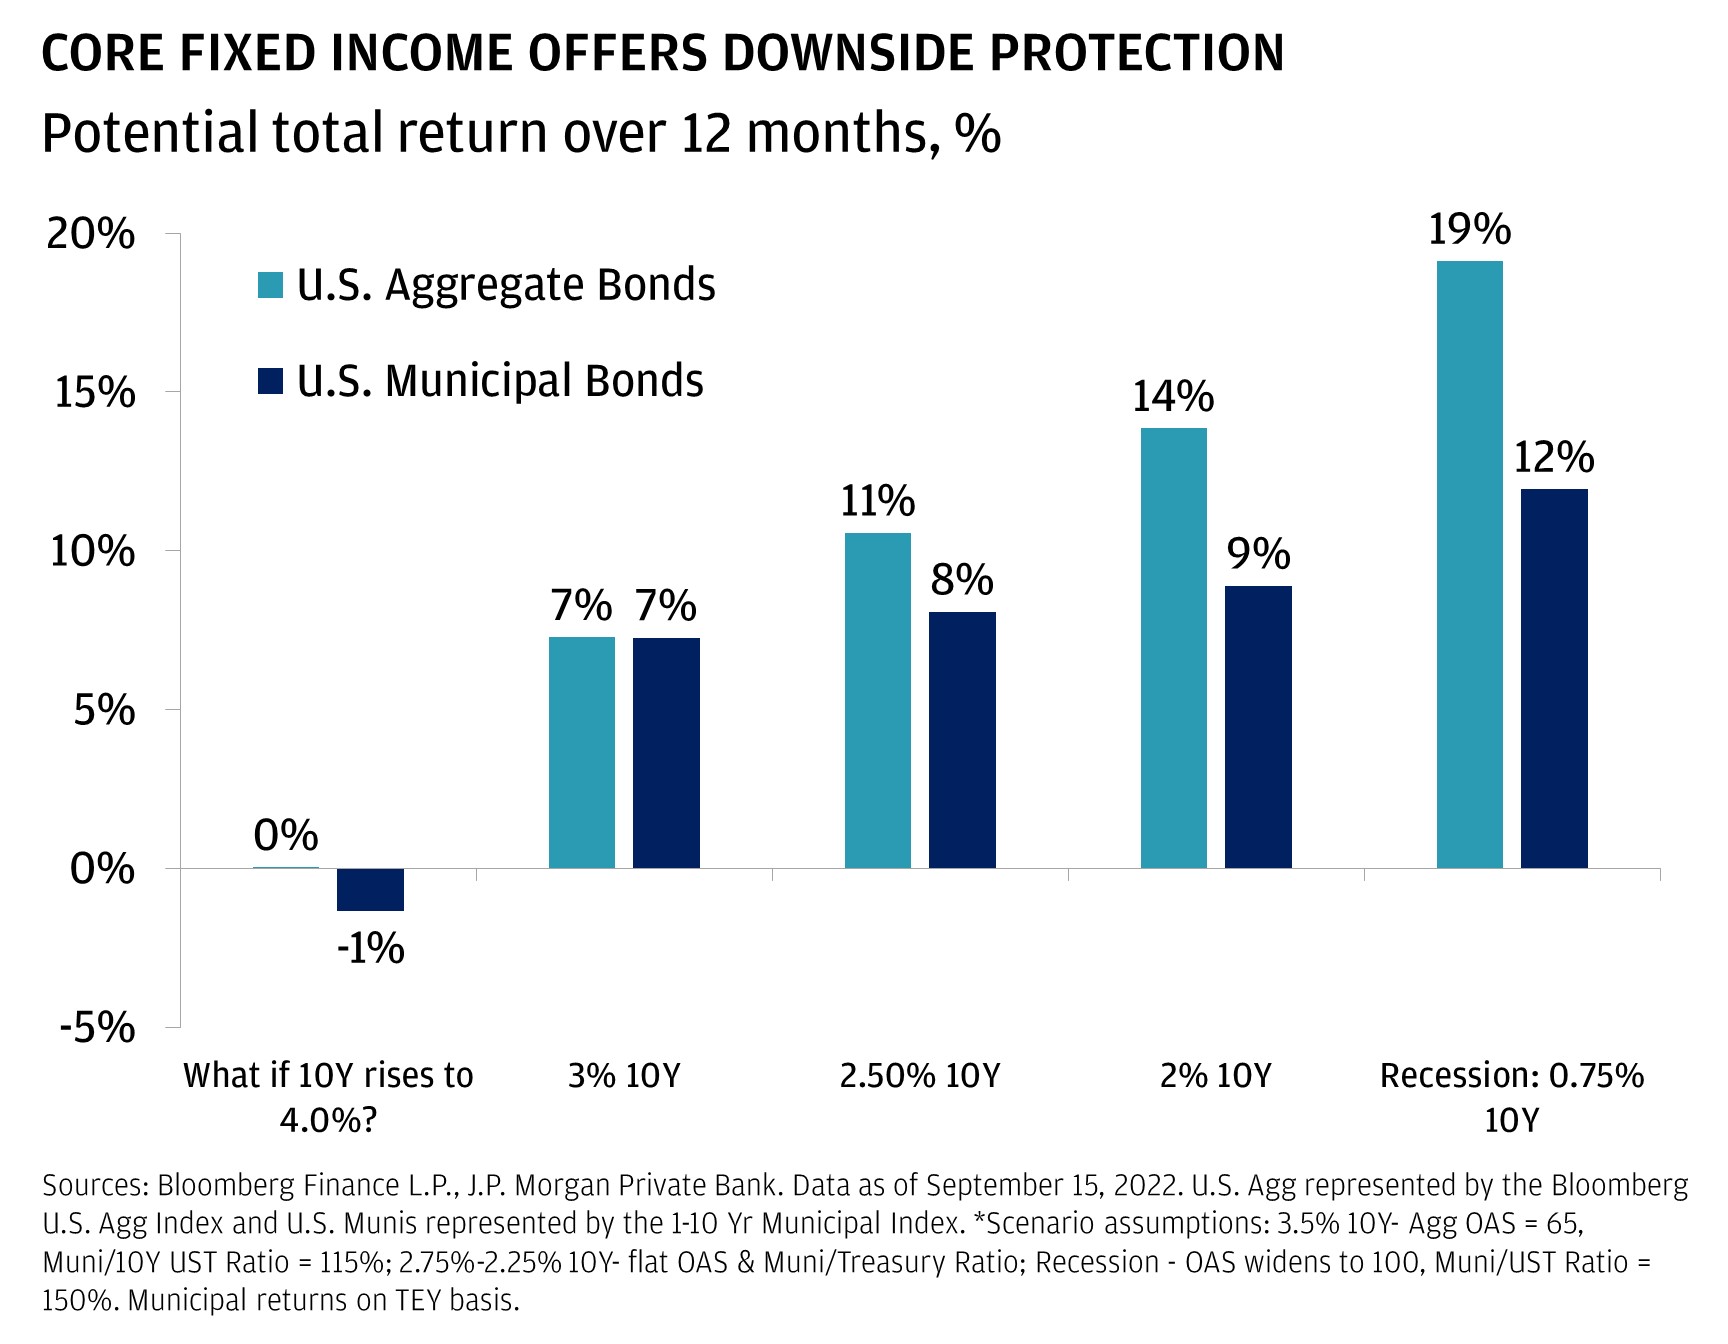 This chart shows the potential total return over 12 months for U.S. Aggregate Bonds and U.S. Municipal Bonds in five different scenarios.